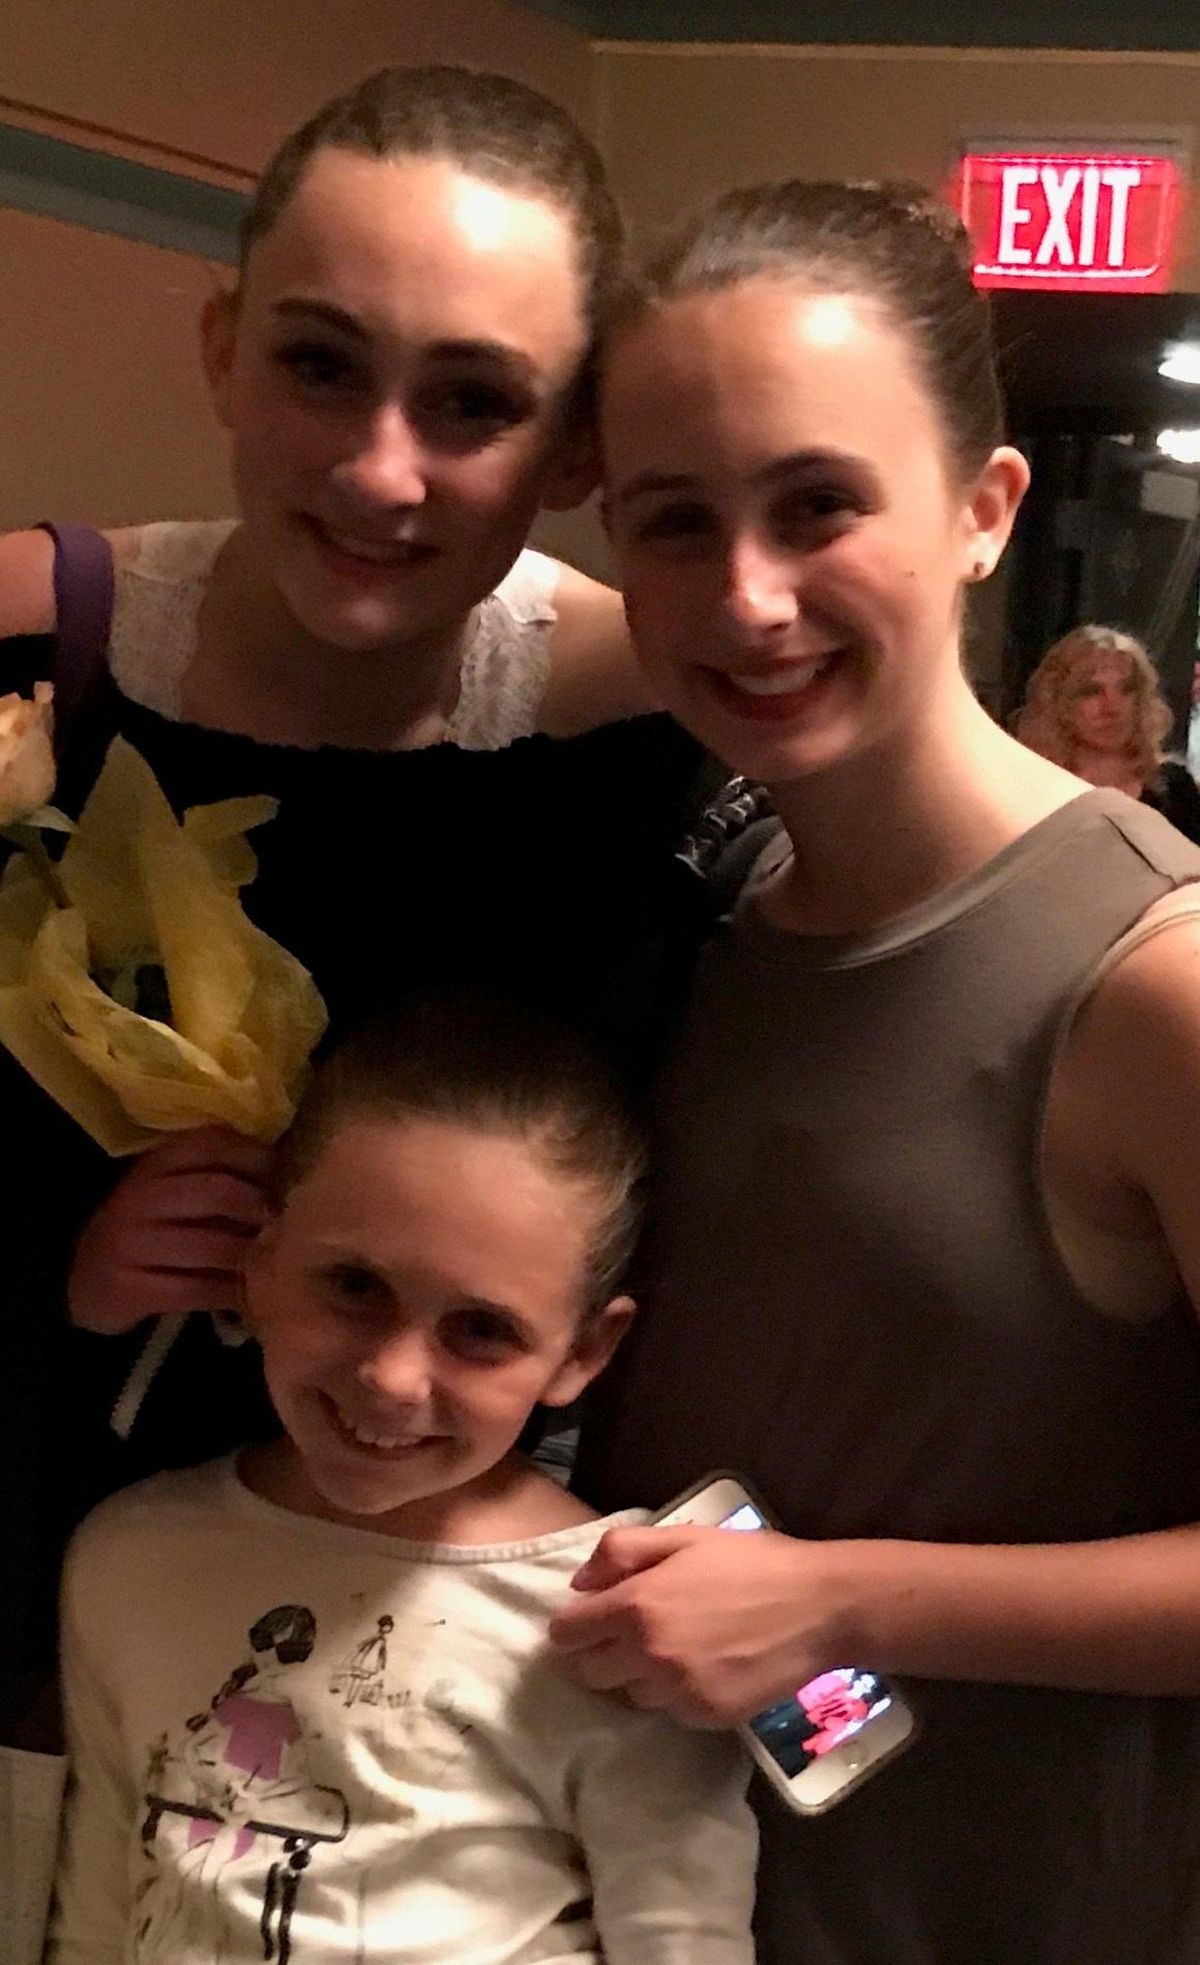 The Staben sisters - Jennika, left, Kiersty, right, and Jacqueline, middle - will all perform in “The Nutcracker,” which features Santa Barbara, California’s State Street Ballet, local dancers and the Spokane Symphony. (Courtesy of Jonathan and Michele Staben)